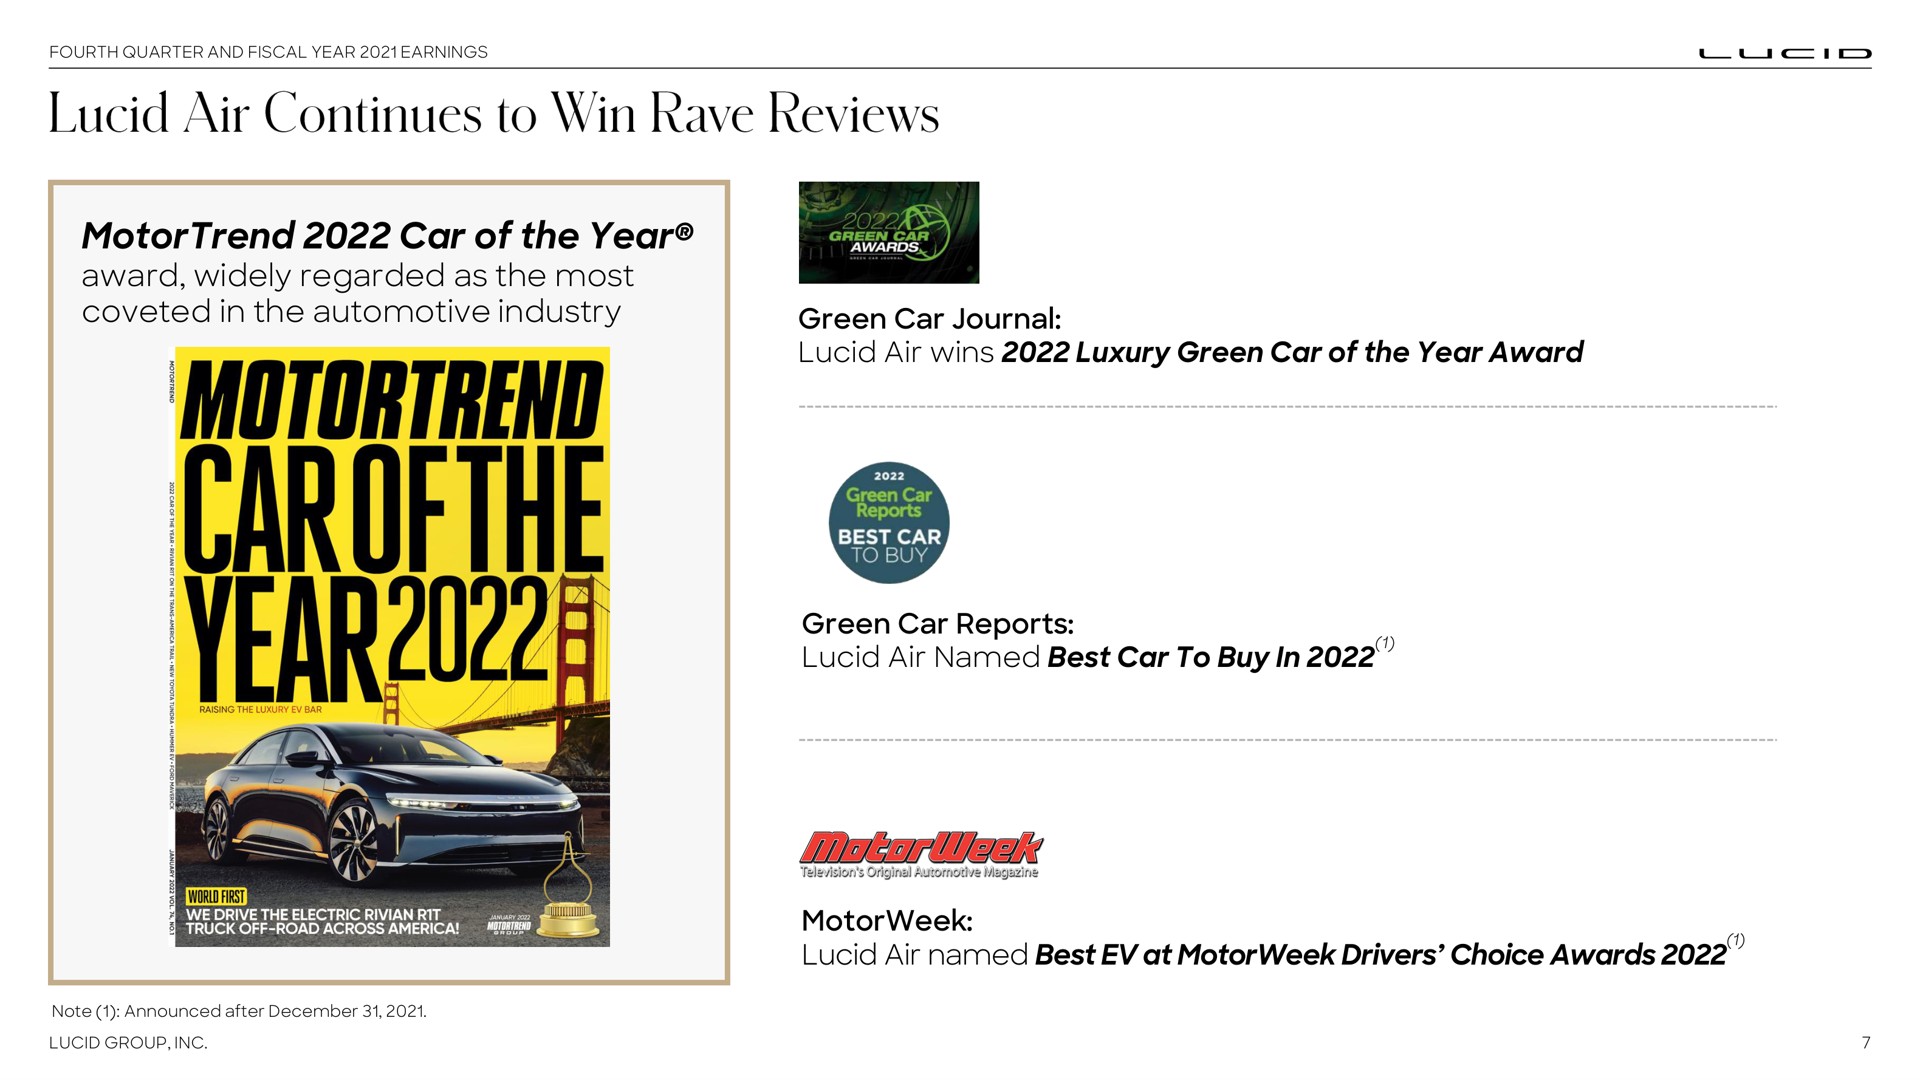 car of the year award widely regarded as the most coveted in the automotive industry green car journal lucid air wins luxury green car of the year award green car reports lucid air named best car to buy in lucid air named best at drivers choice awards continues win rave reviews | Lucid Motors